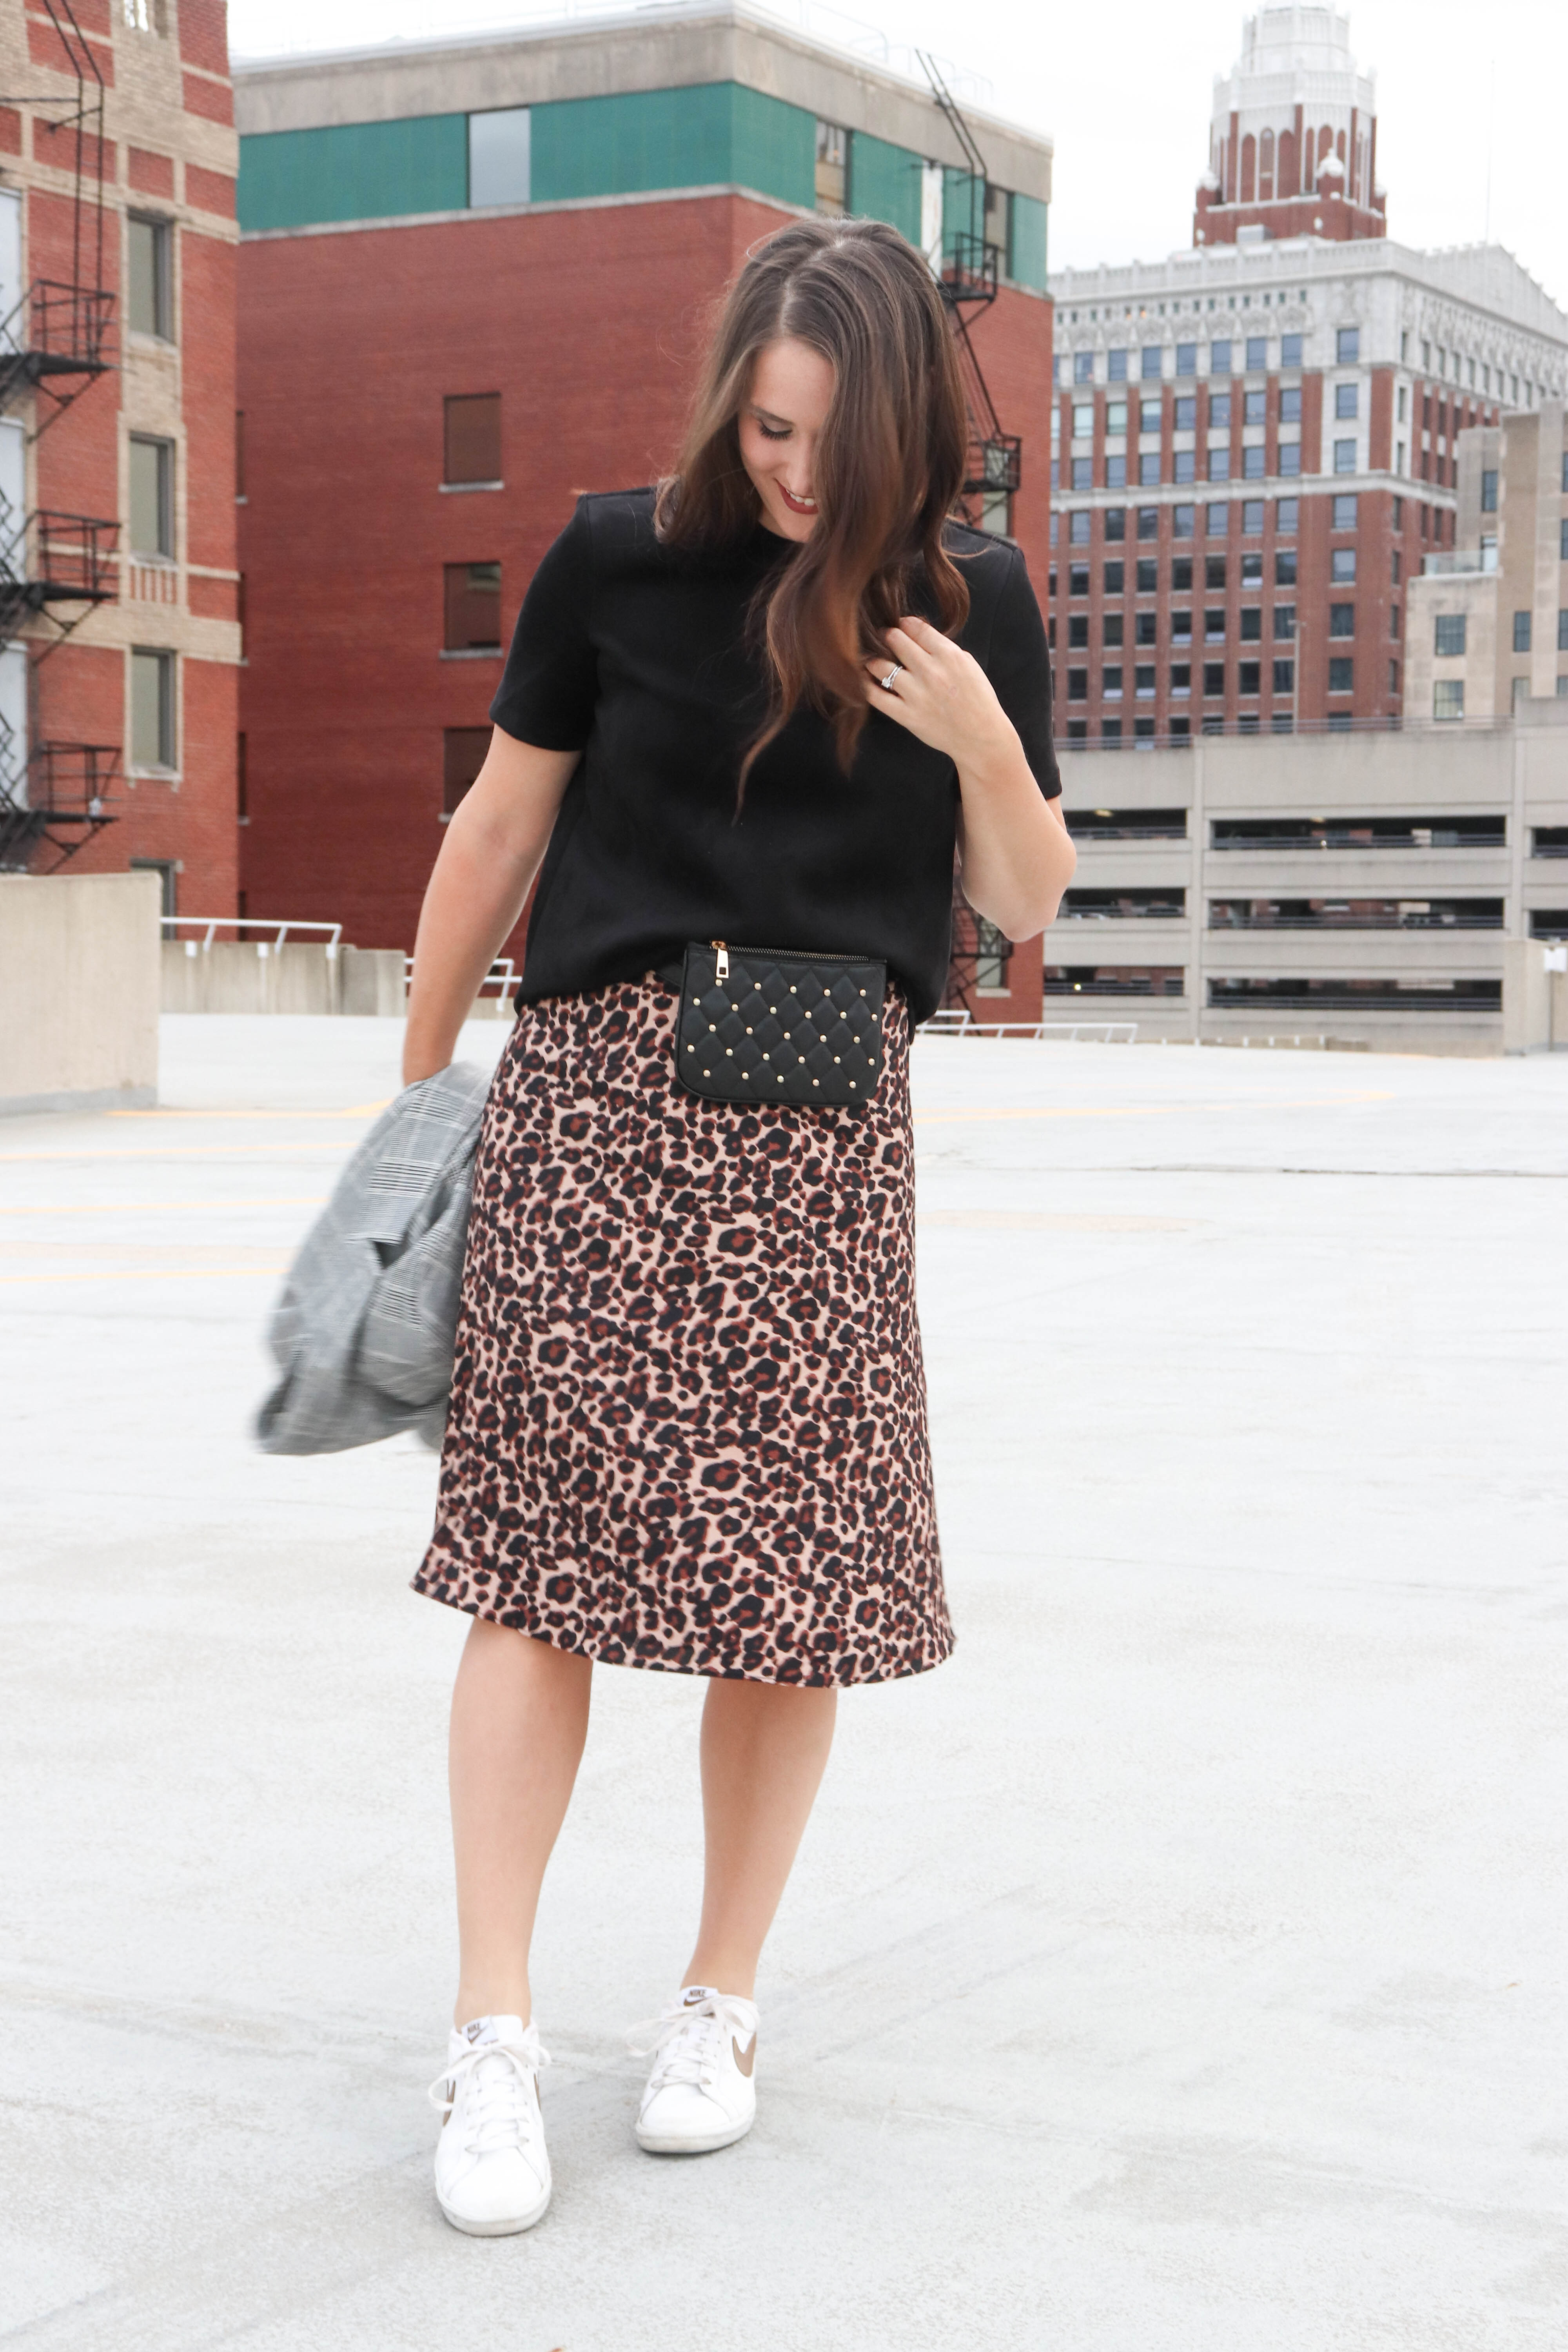 Why You Shouldn't Be Scared of Leopard Print - LOFT Leopard Print Skirt